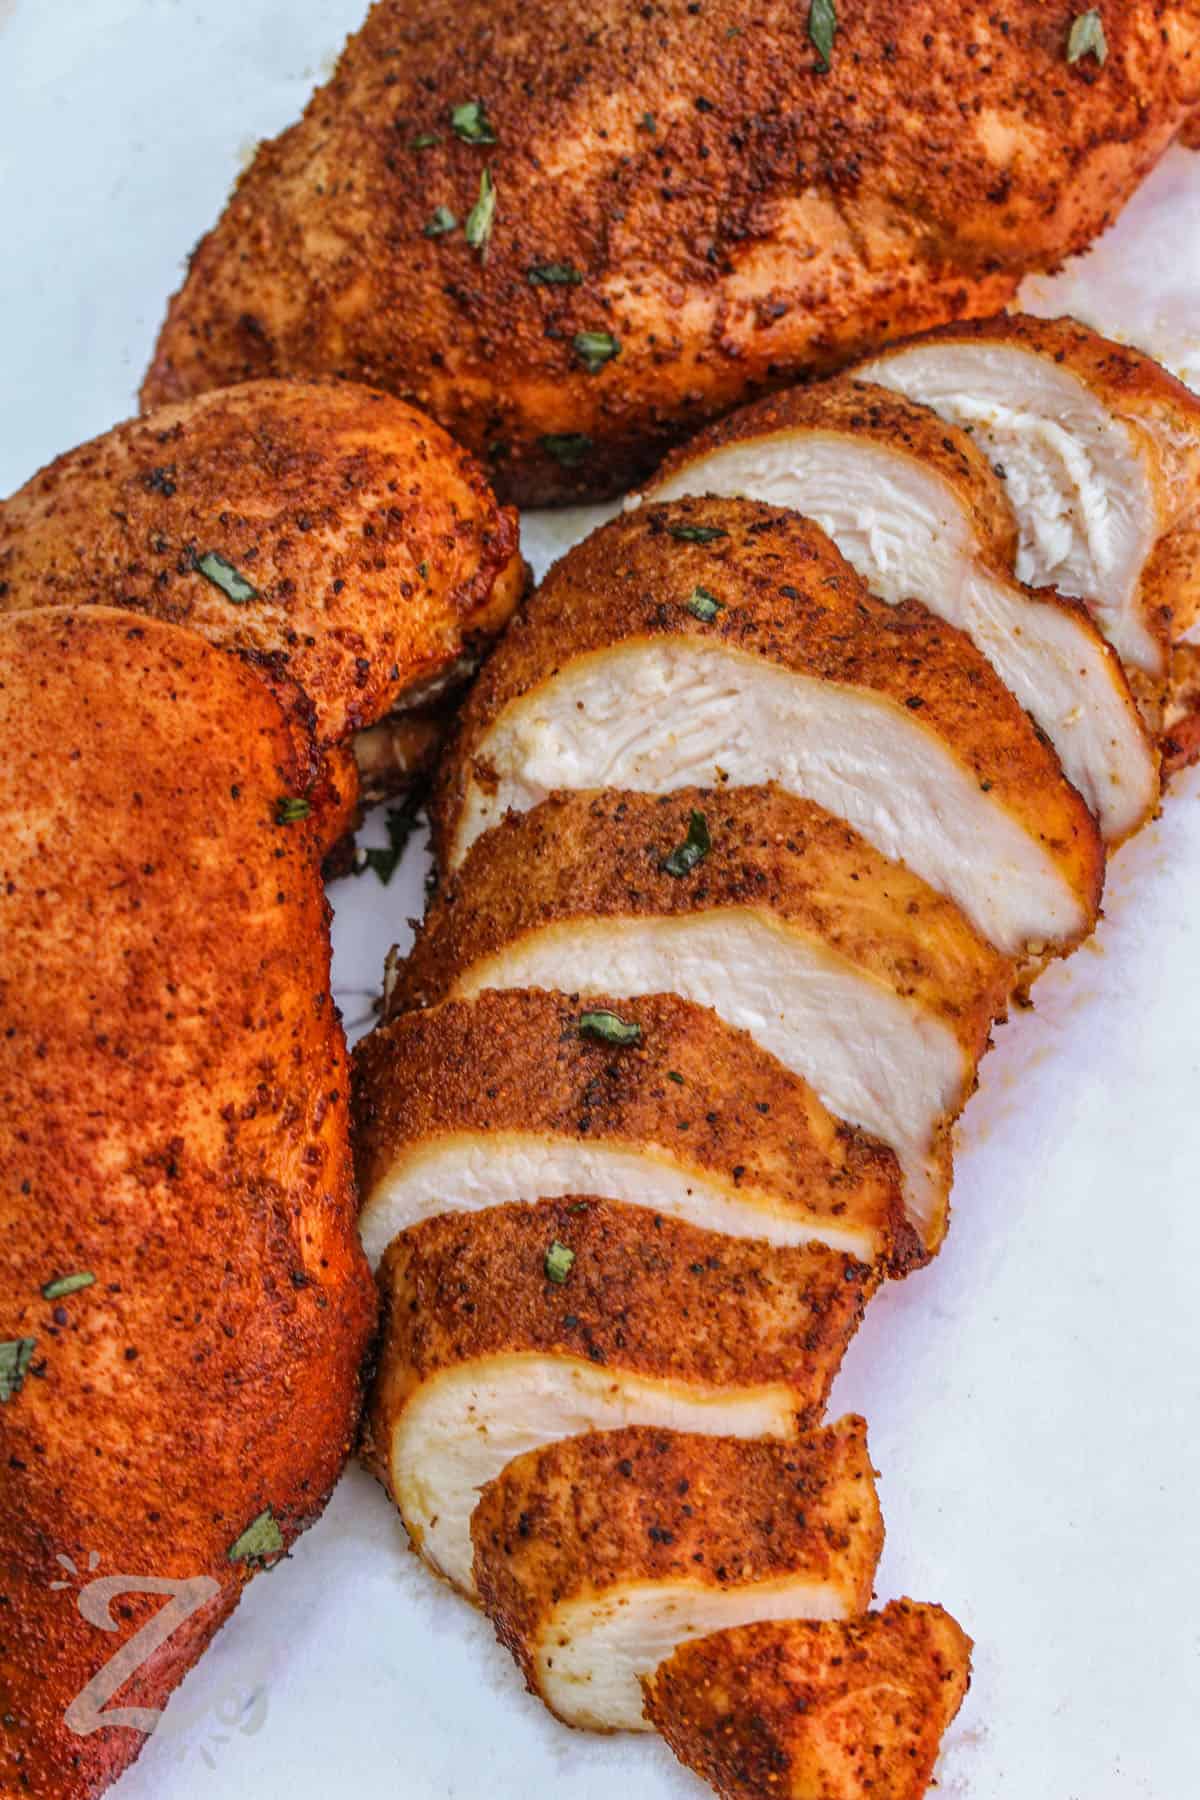 Smoked Chicken Breasts with one cut into slices